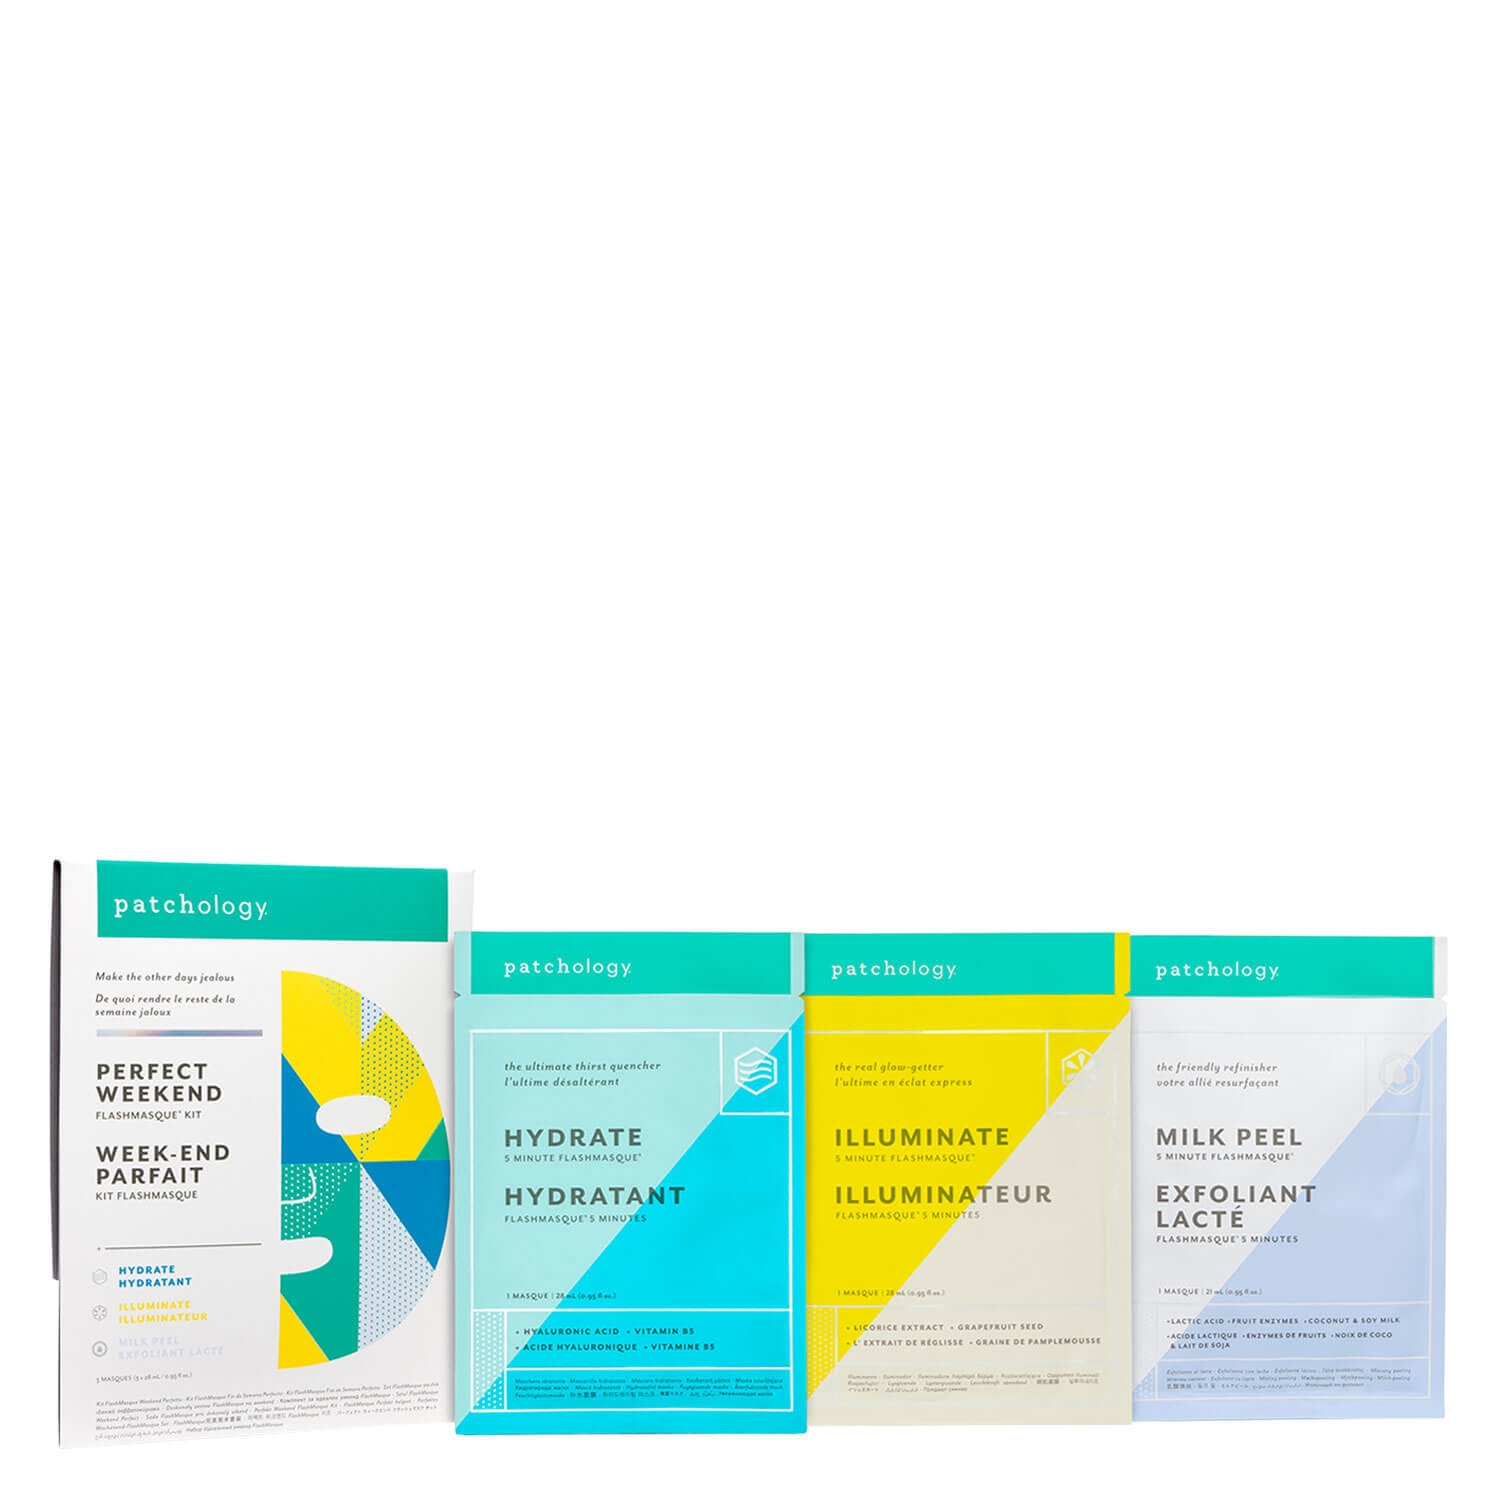 Product image from patchology Kits - Perfect Weekend Trio FlashMasque Sheet Masks